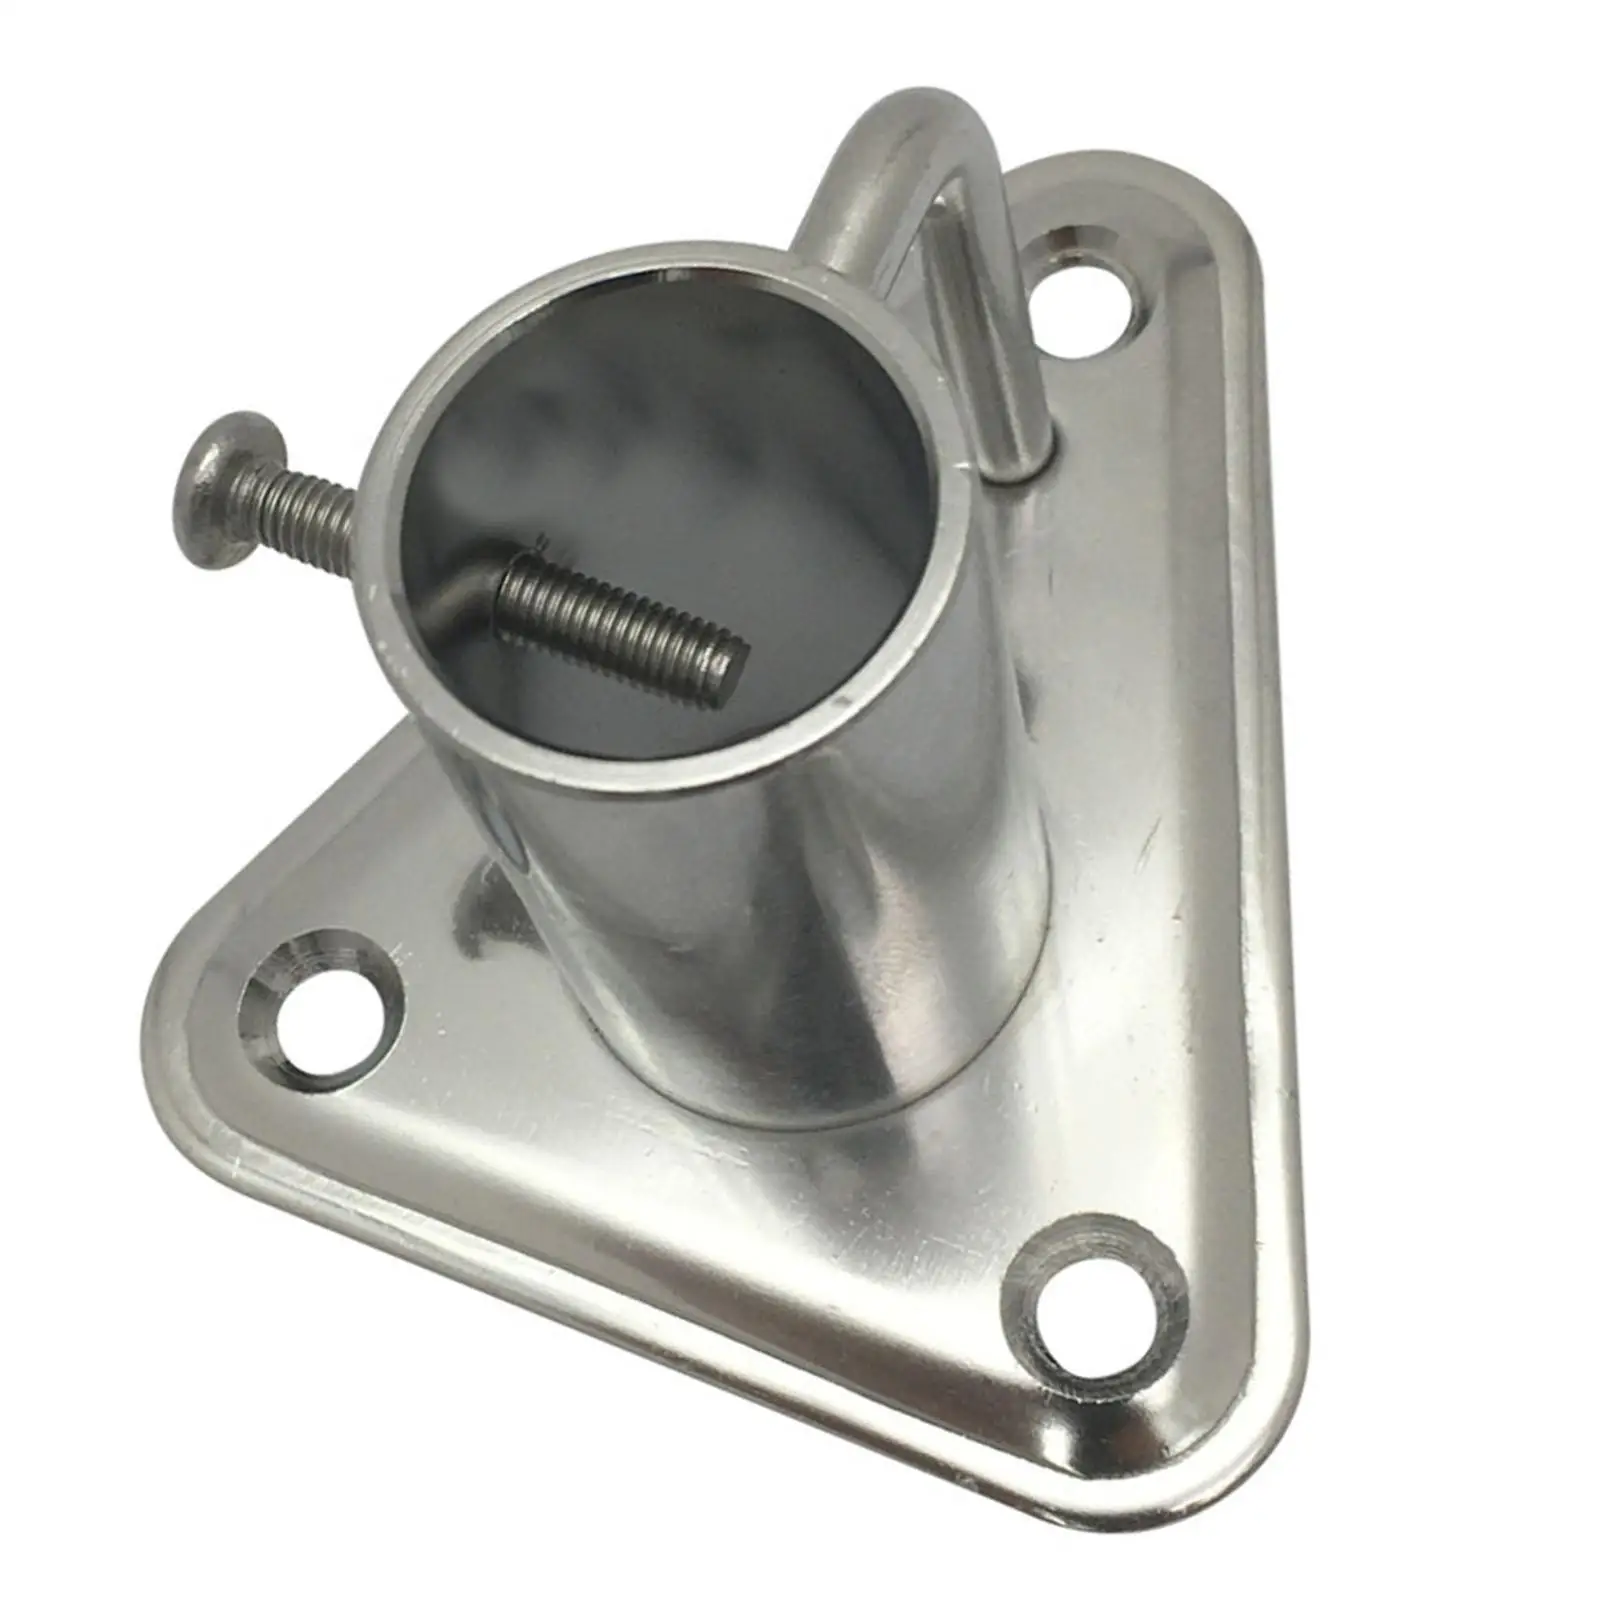 Boat Cleat Stanchion Socket, 90 Degree for 1